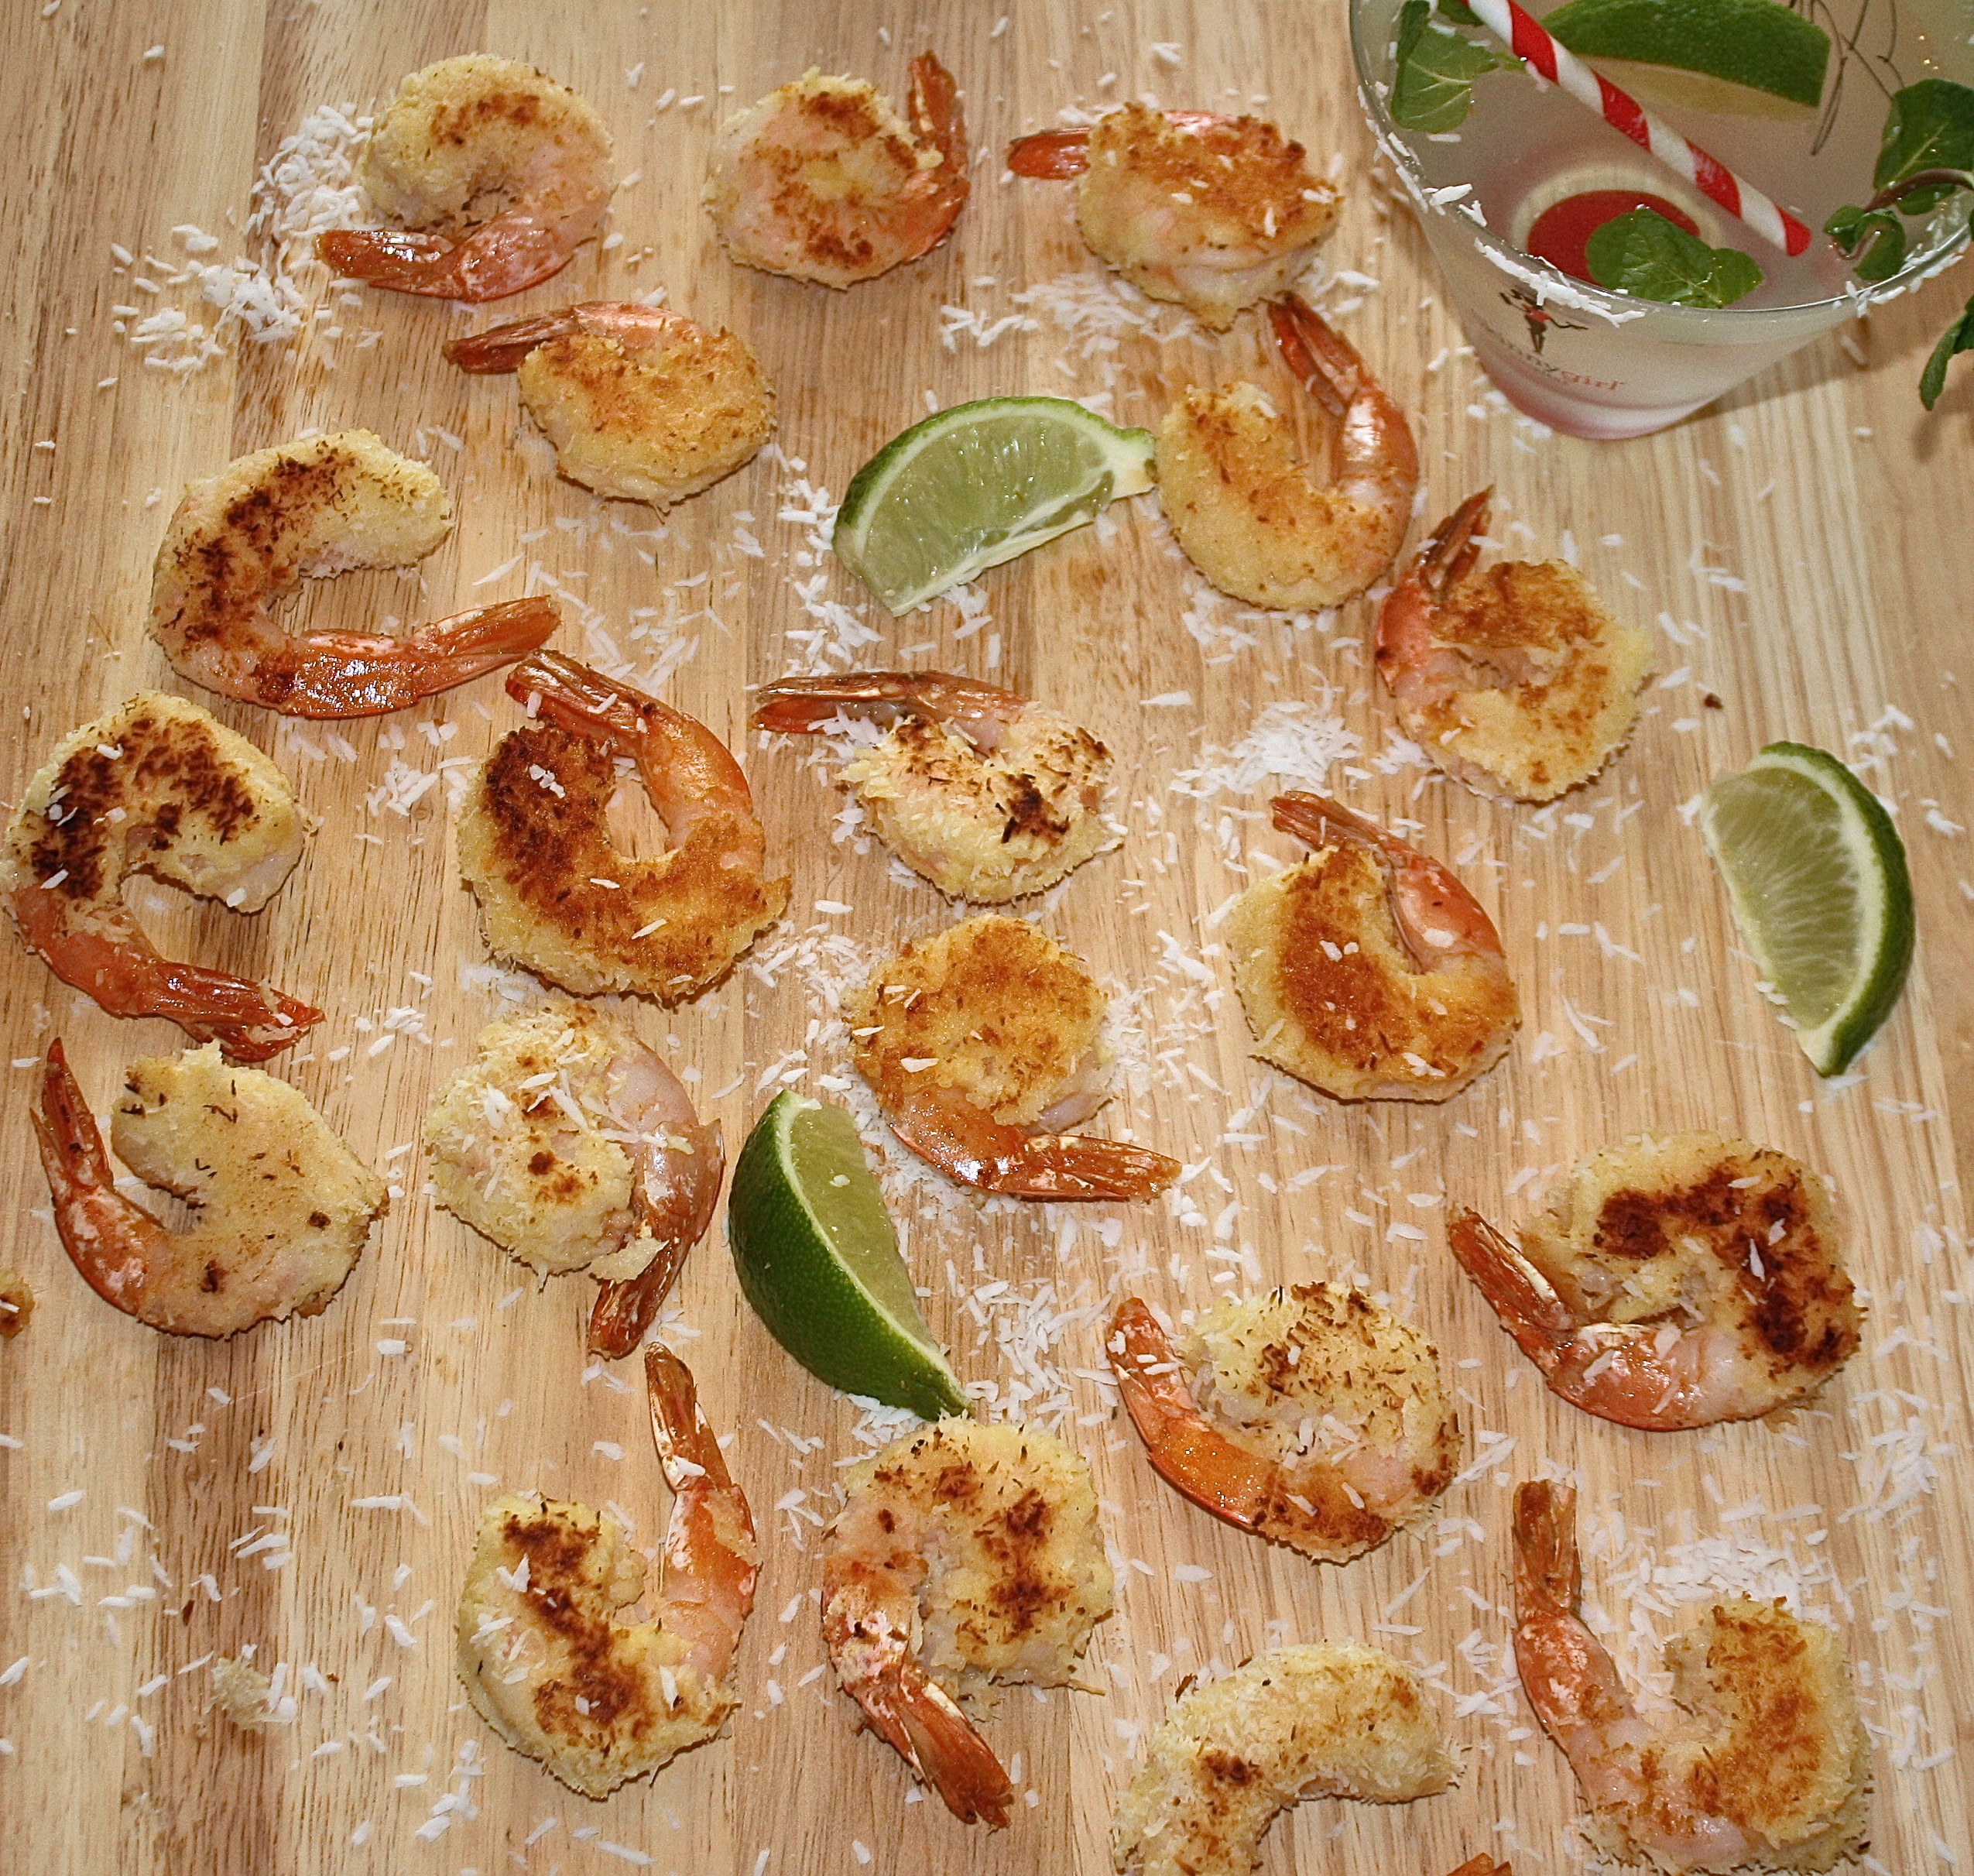 Scattered coconut lime shrimp on a wood board with sliced limes.